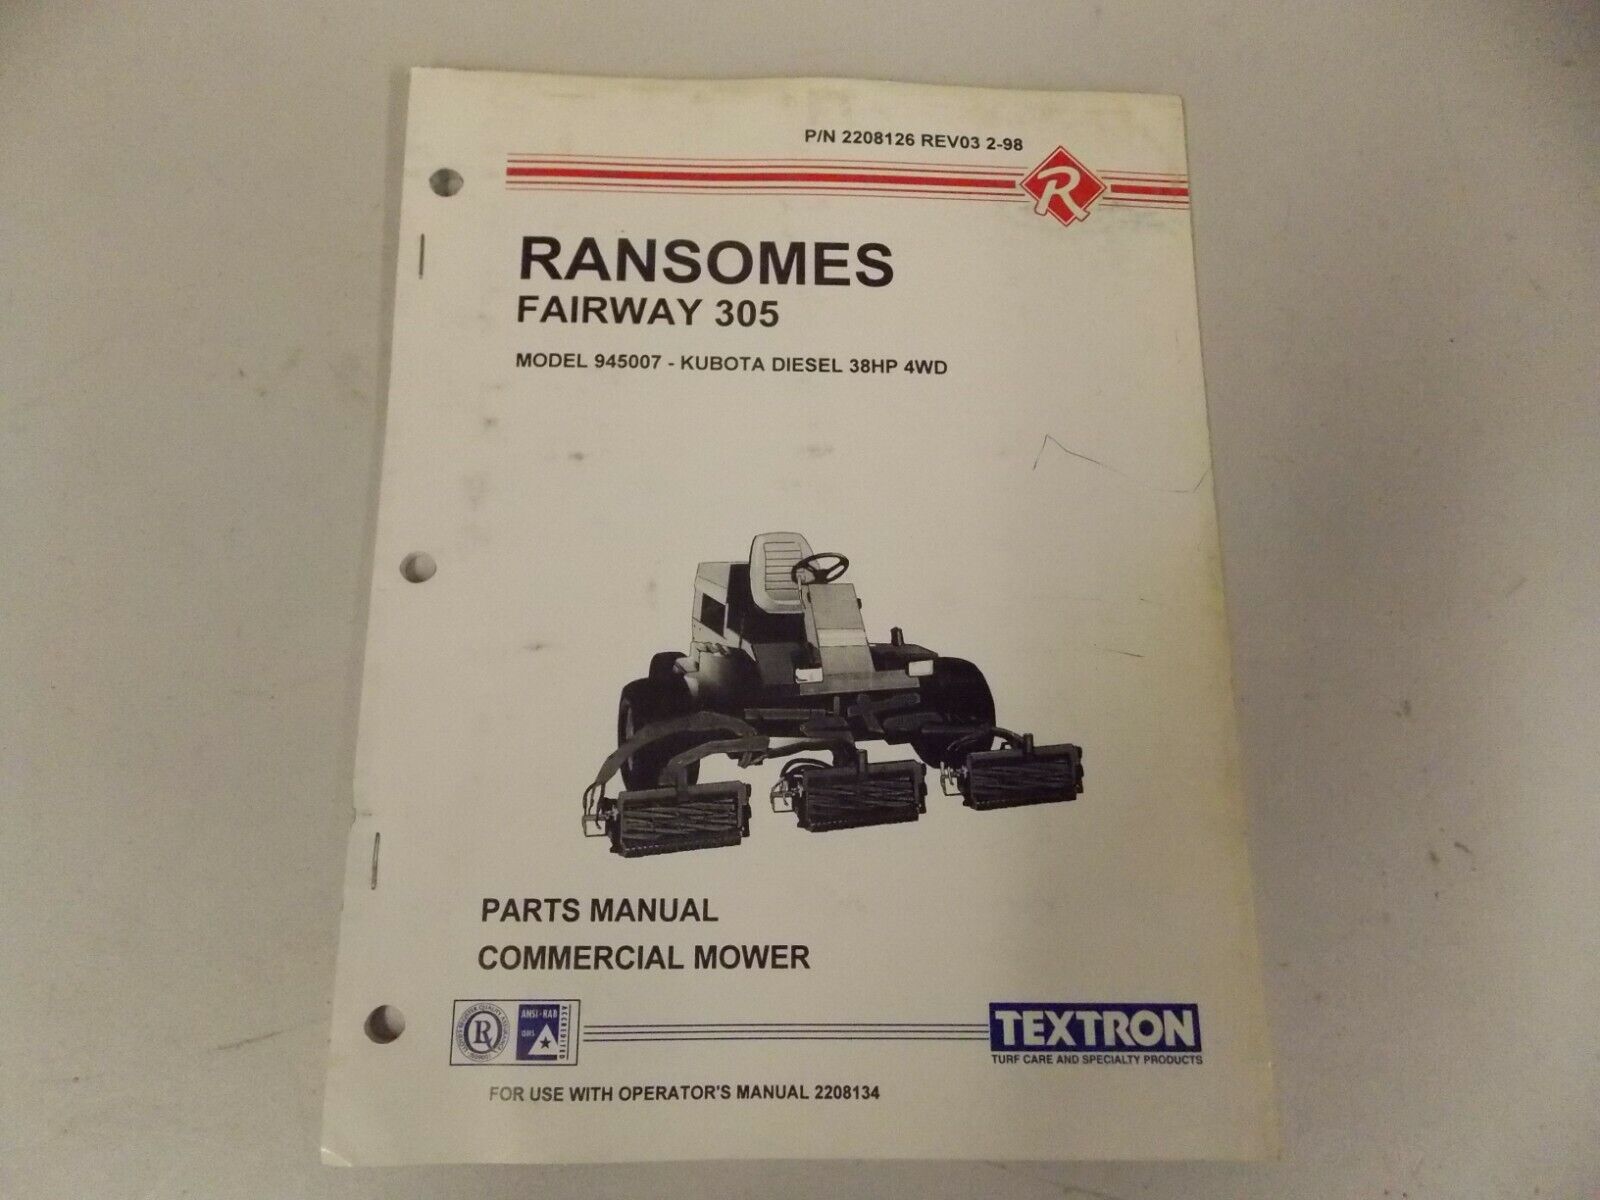 RANSOMES PARTS MANUAL FOR FAIRWAY 305 GOLF REEL LAWN MOWER